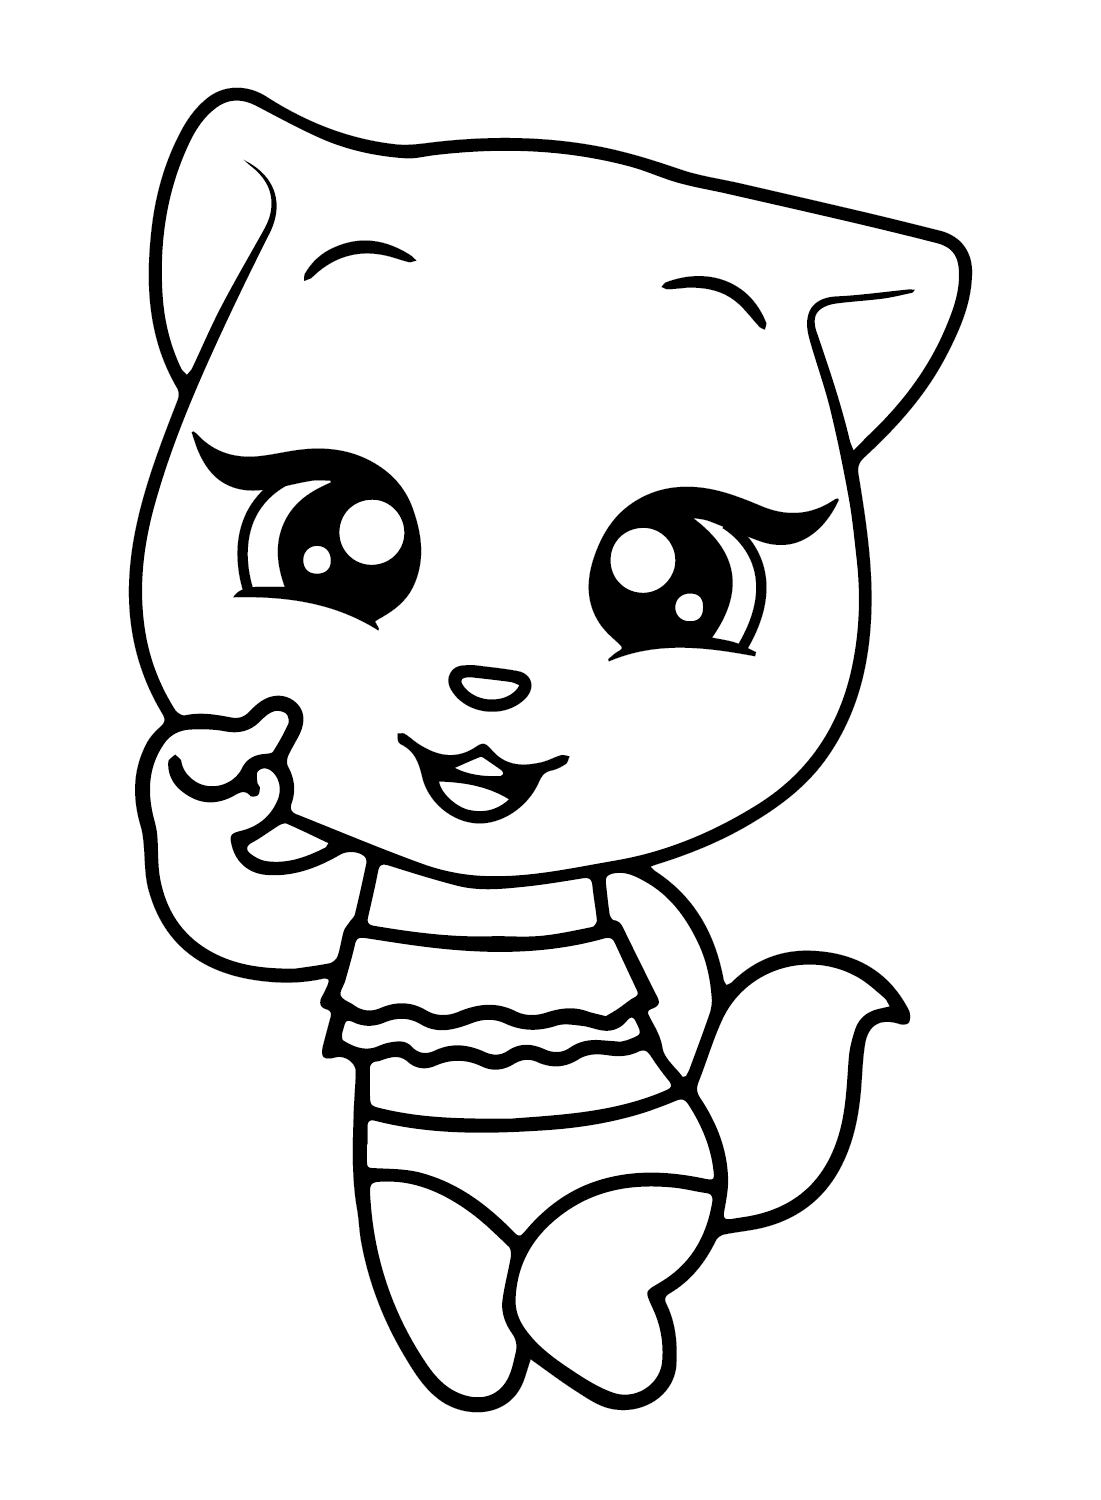 Talking angela coloring pages printable for free download